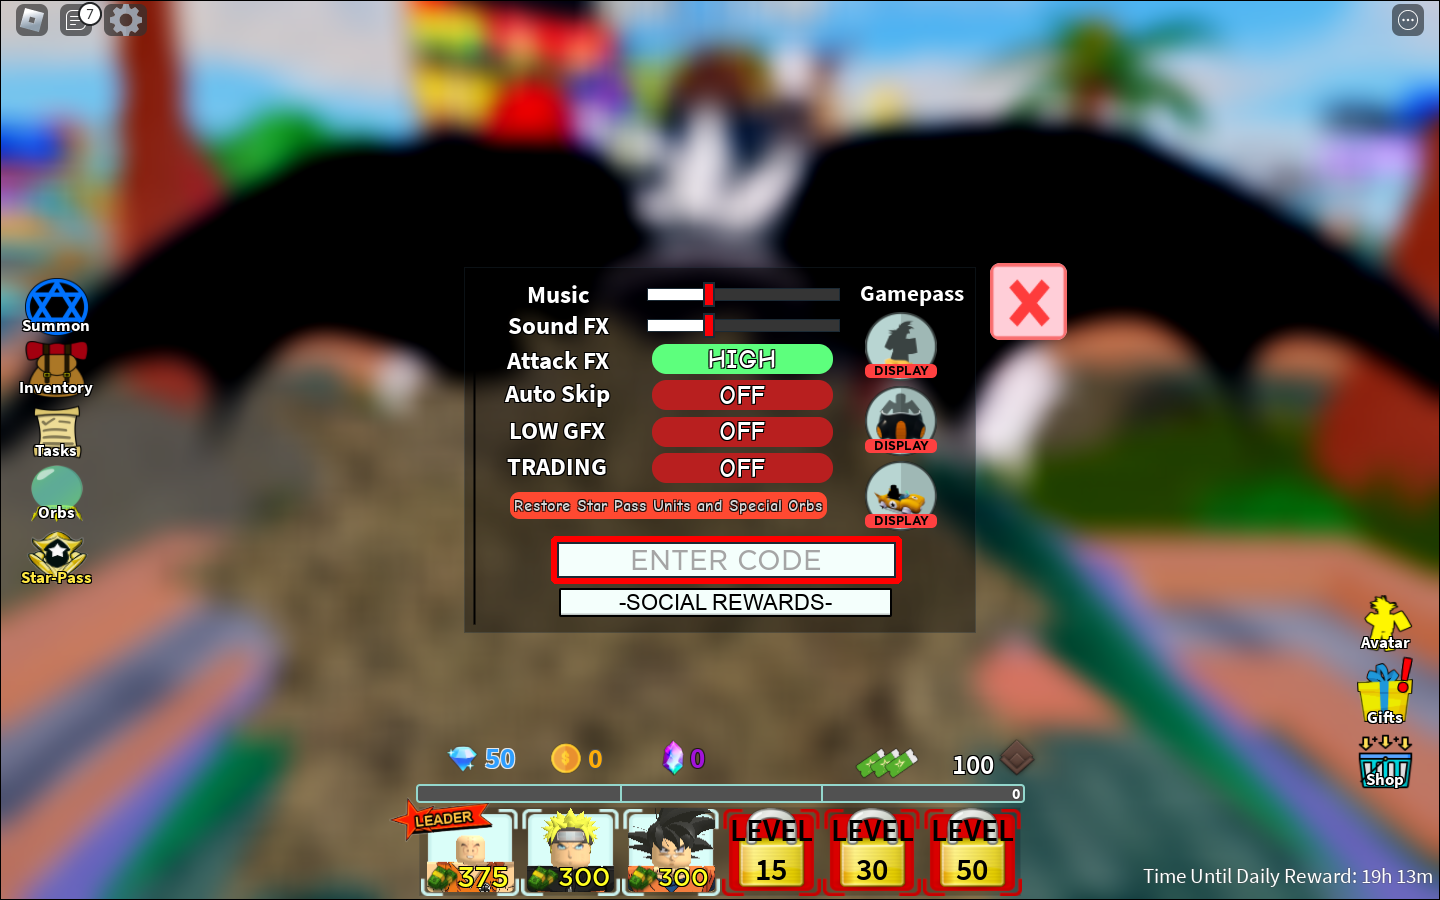 Roblox - All Star Tower Defense Codes